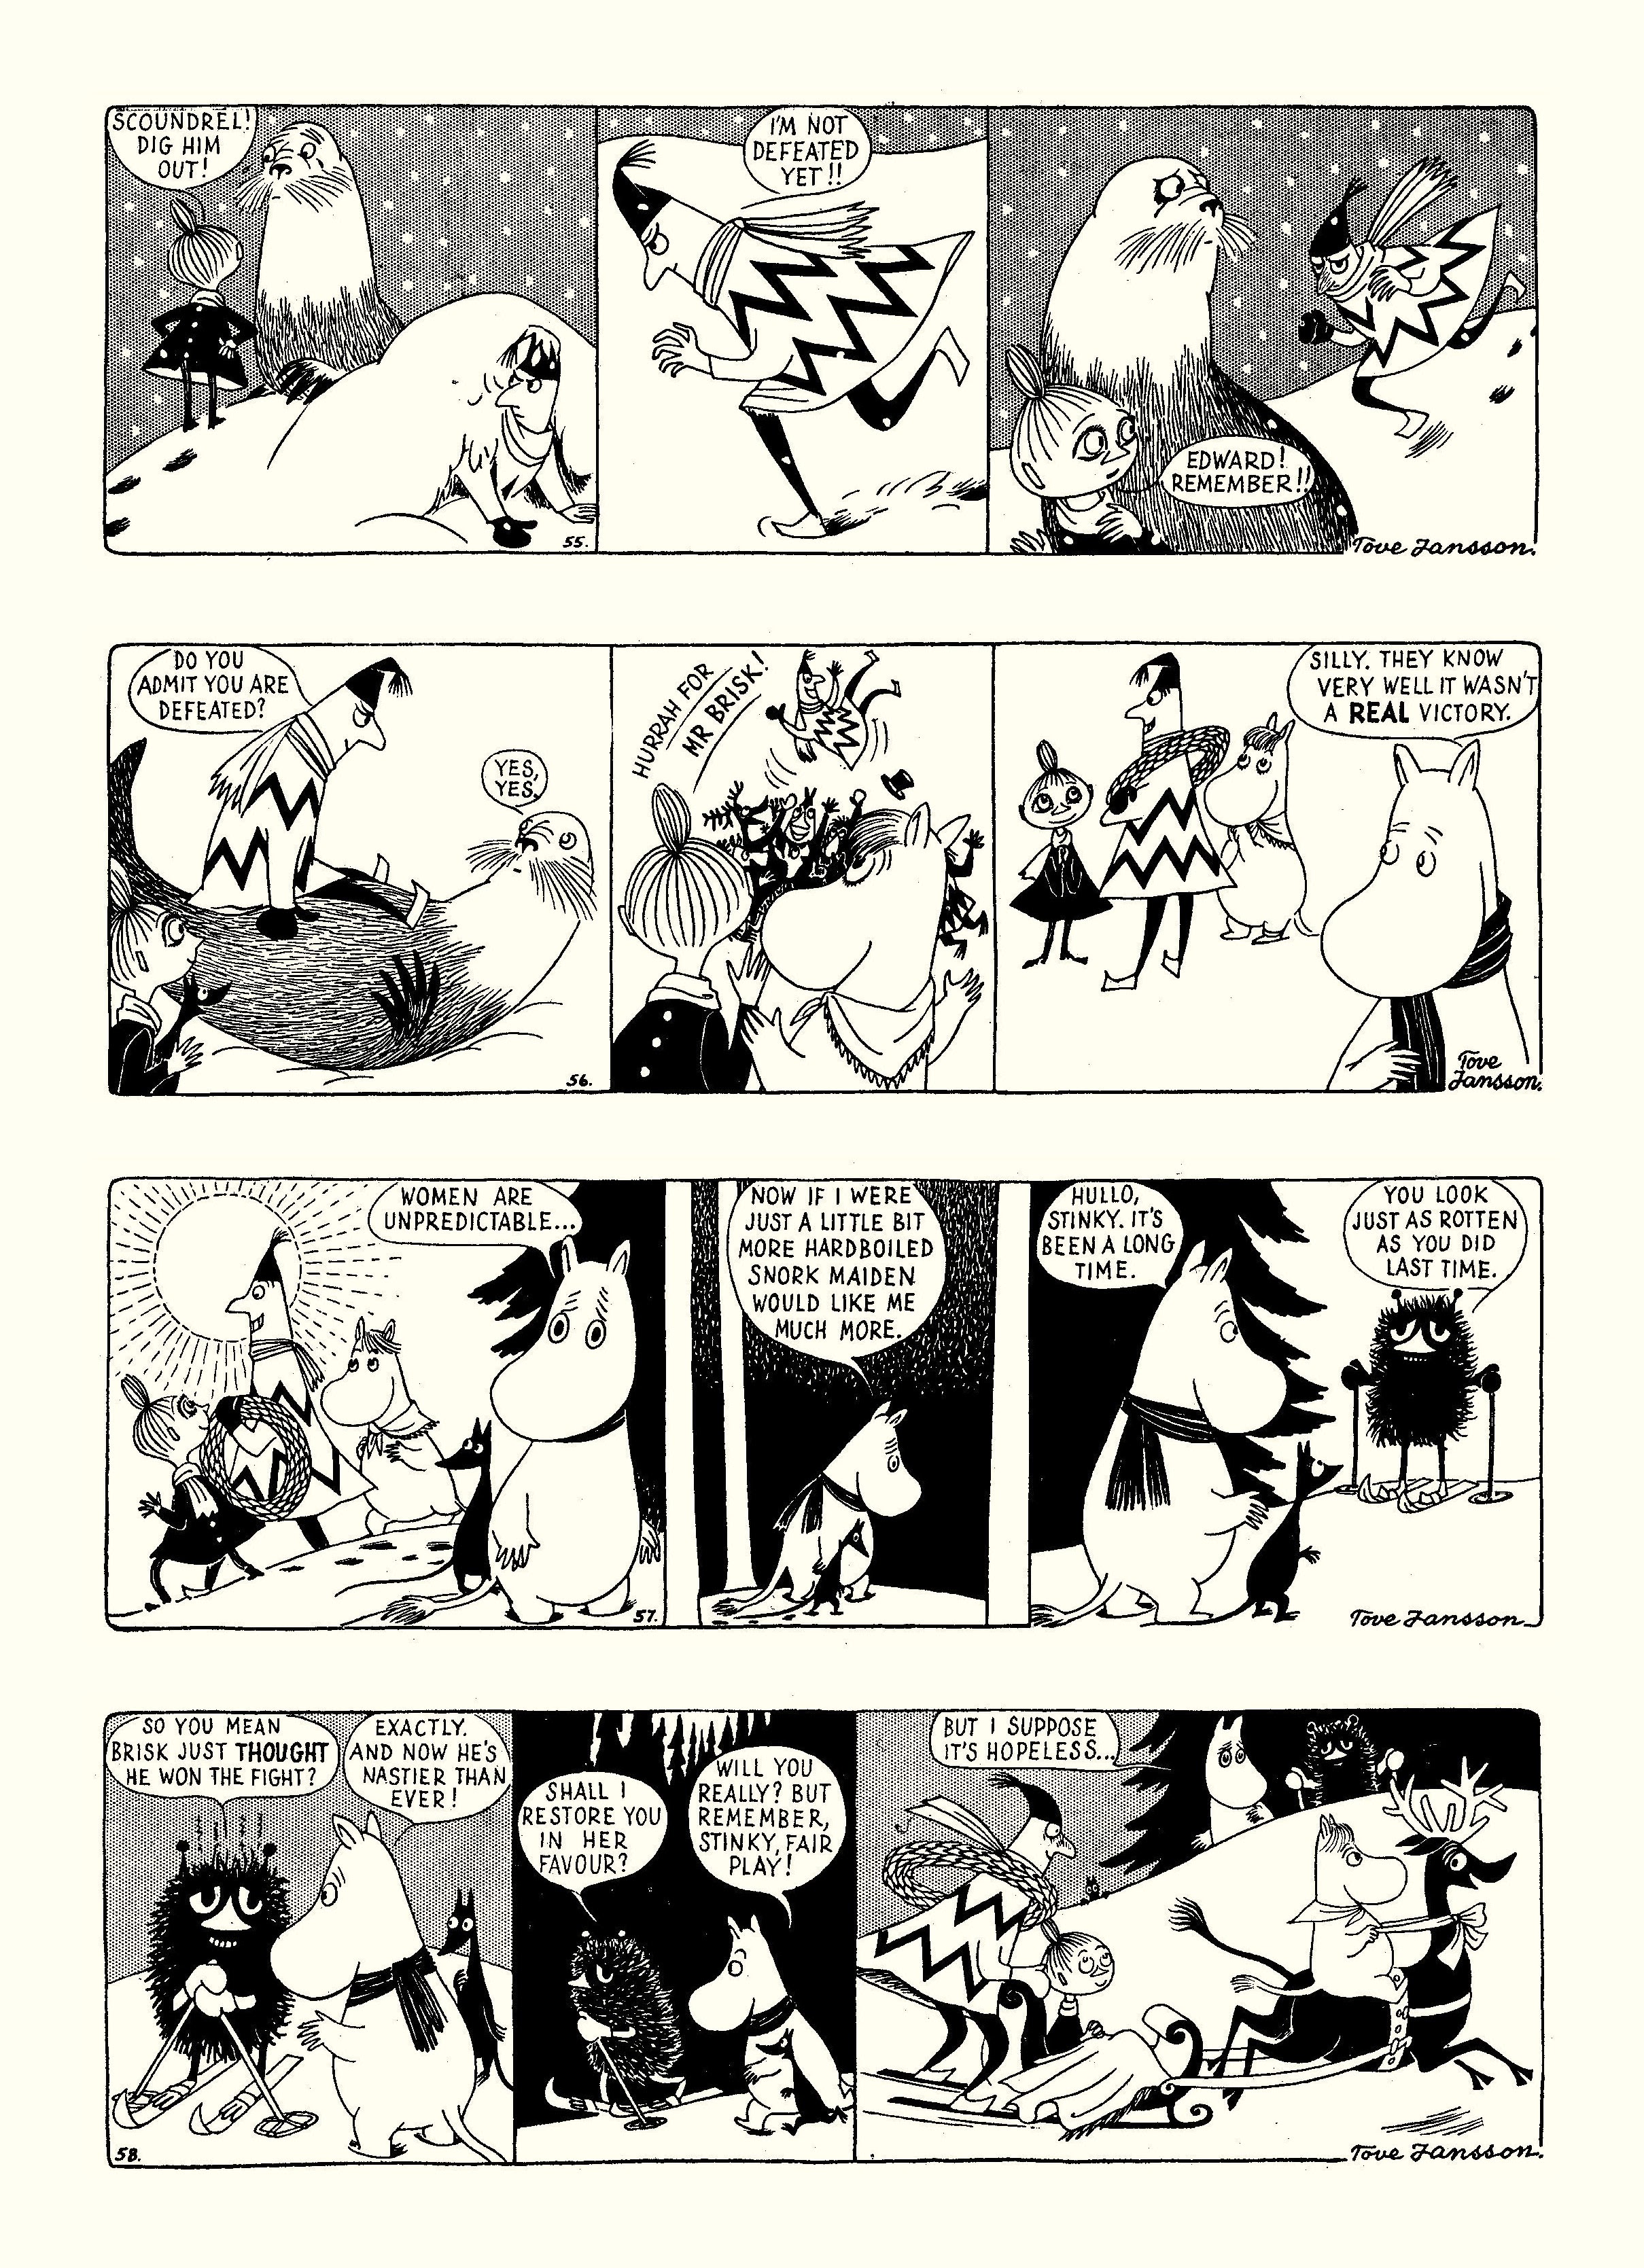 Read online Moomin: The Complete Tove Jansson Comic Strip comic -  Issue # TPB 2 - 20